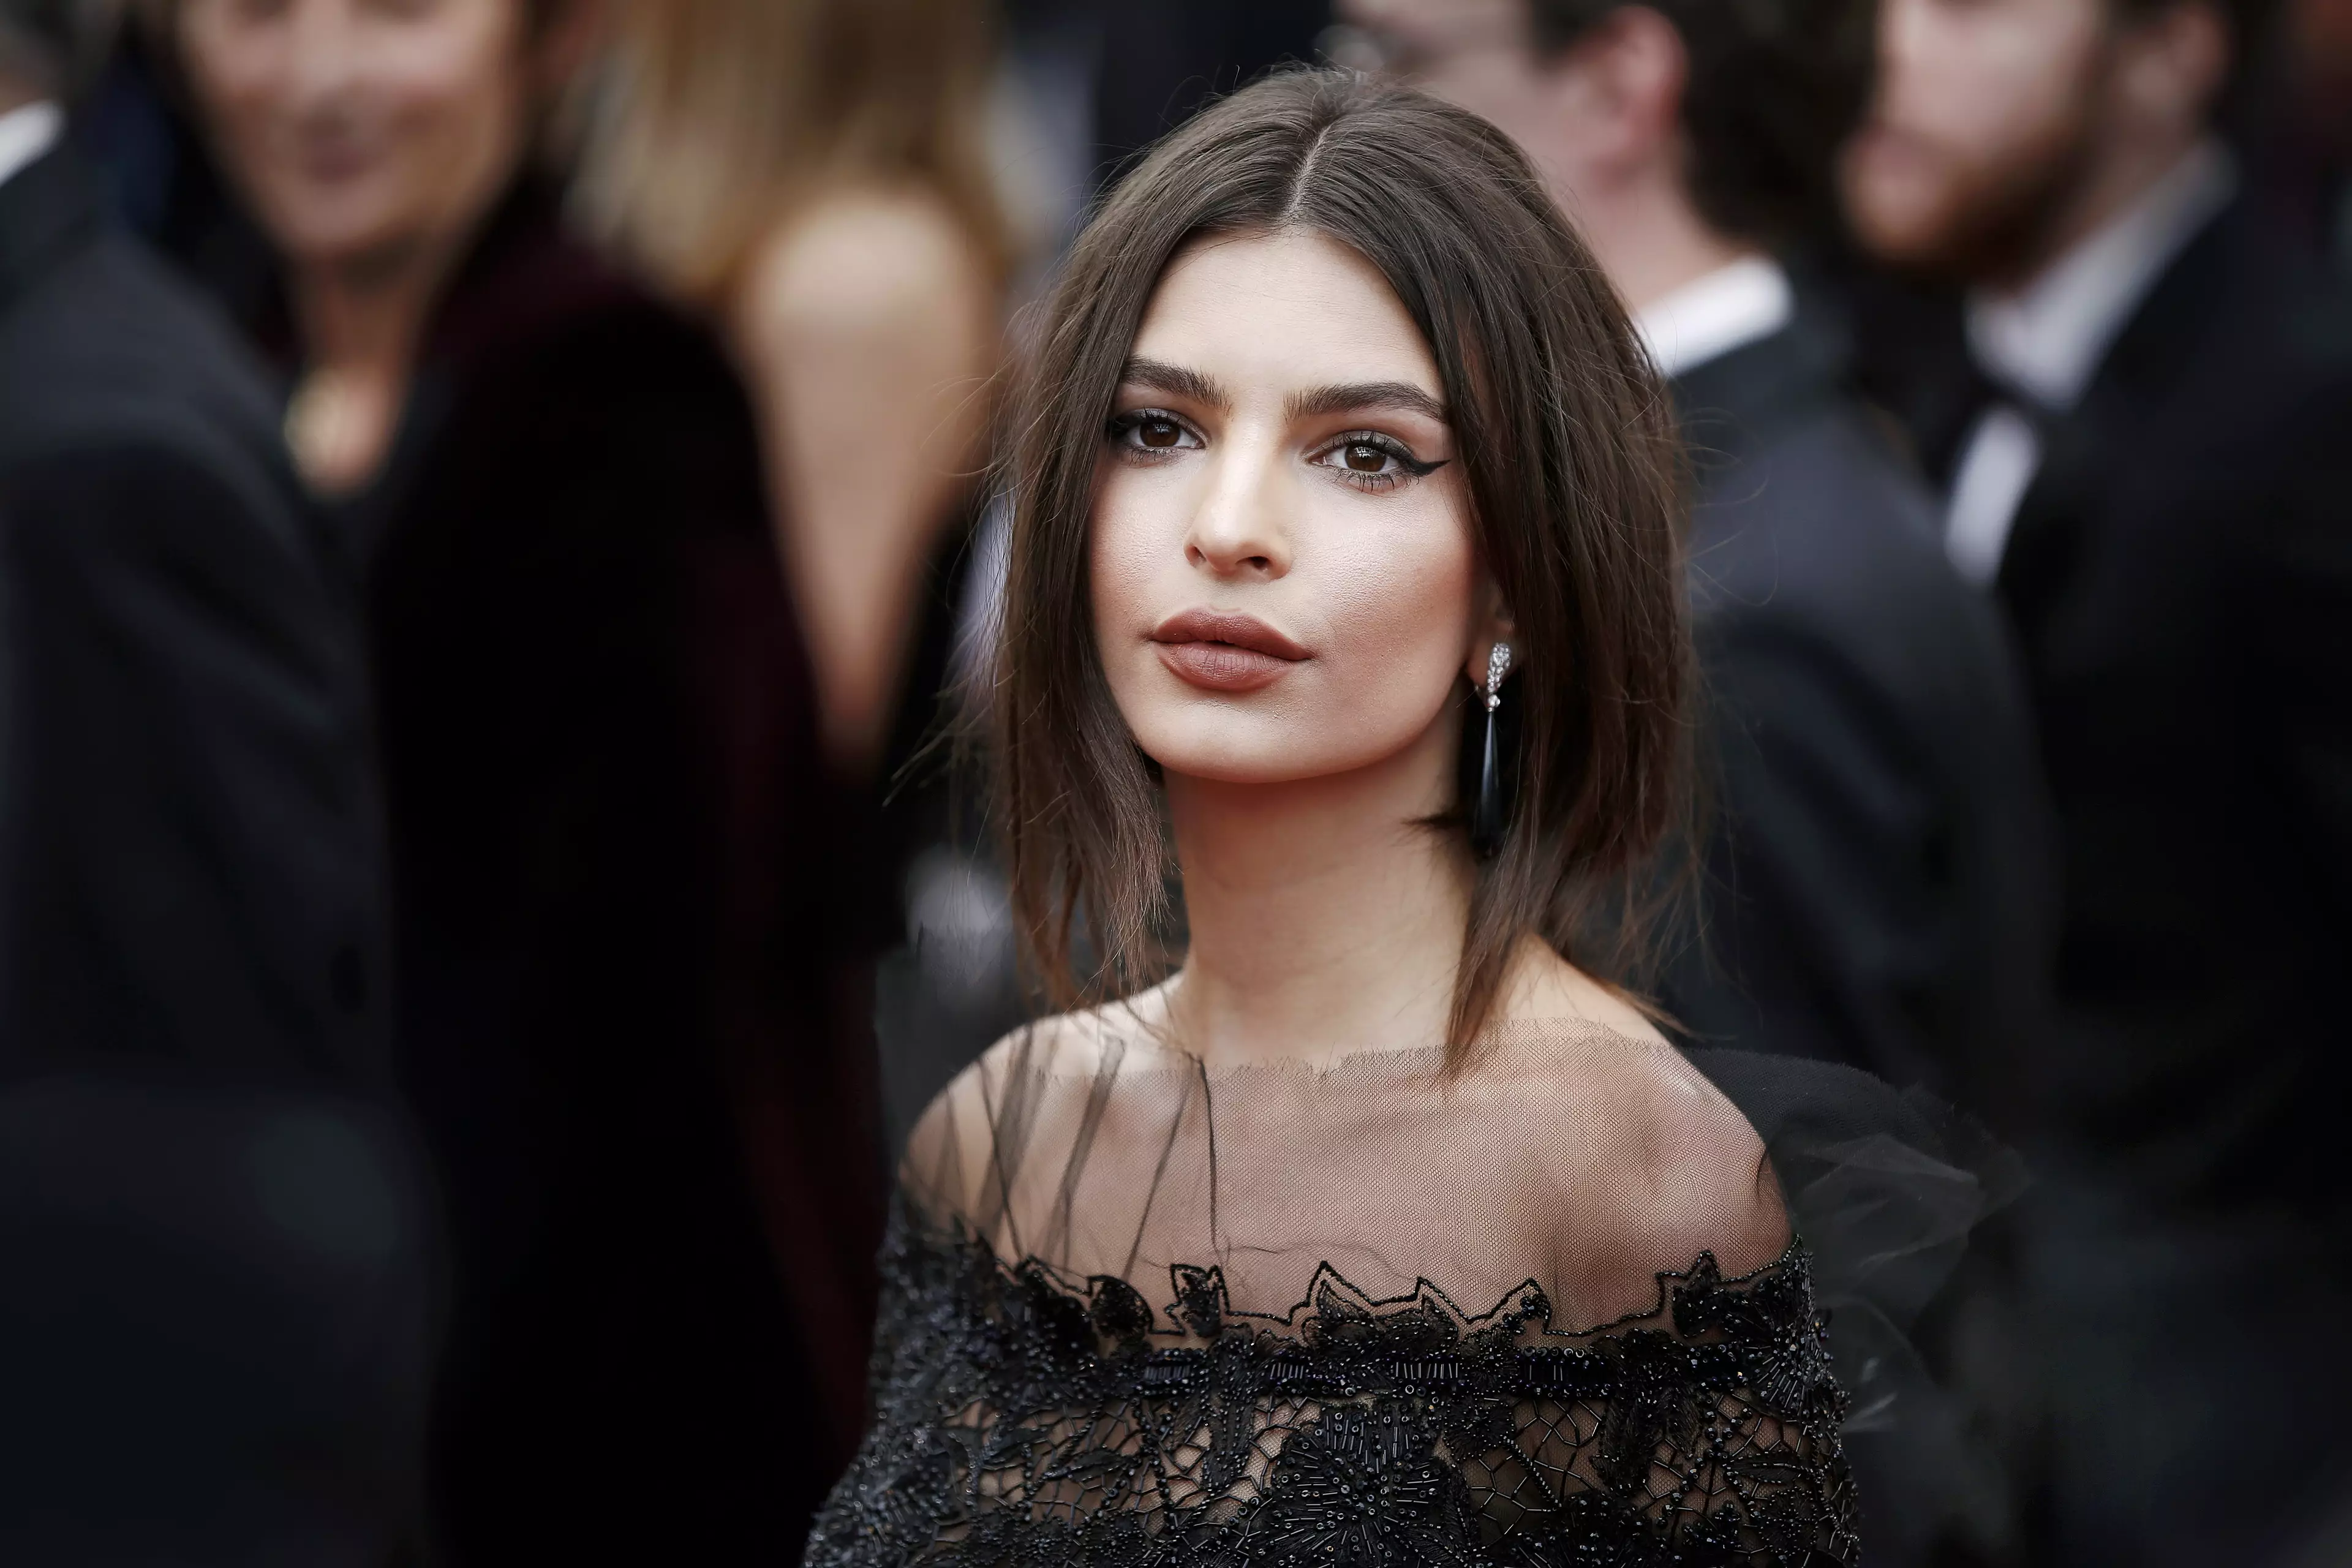 It's been suggested that Em Rata's modelling career makes her a less plausible 'victim' (